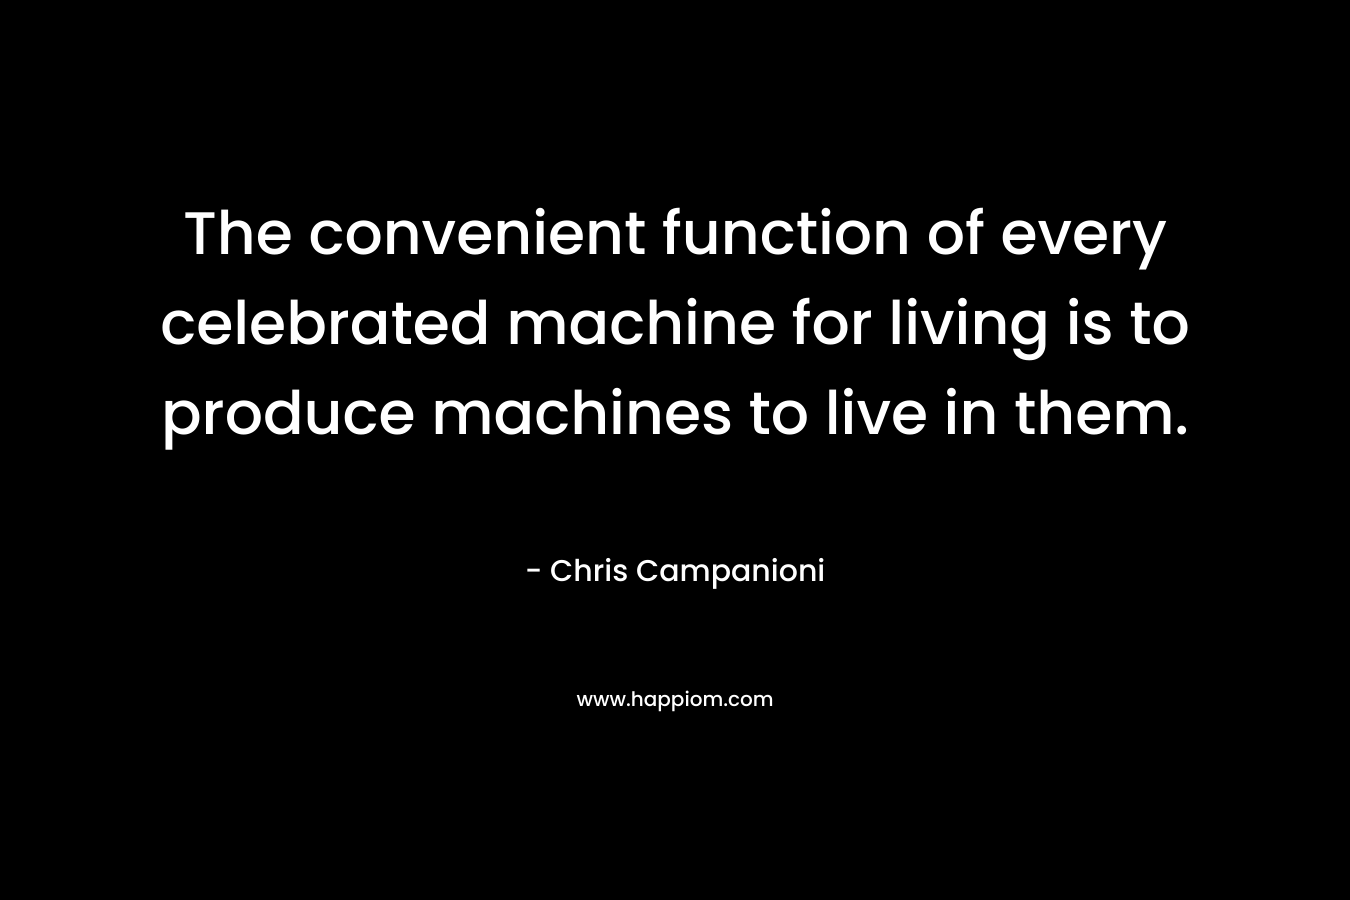 The convenient function of every celebrated machine for living is to produce machines to live in them.